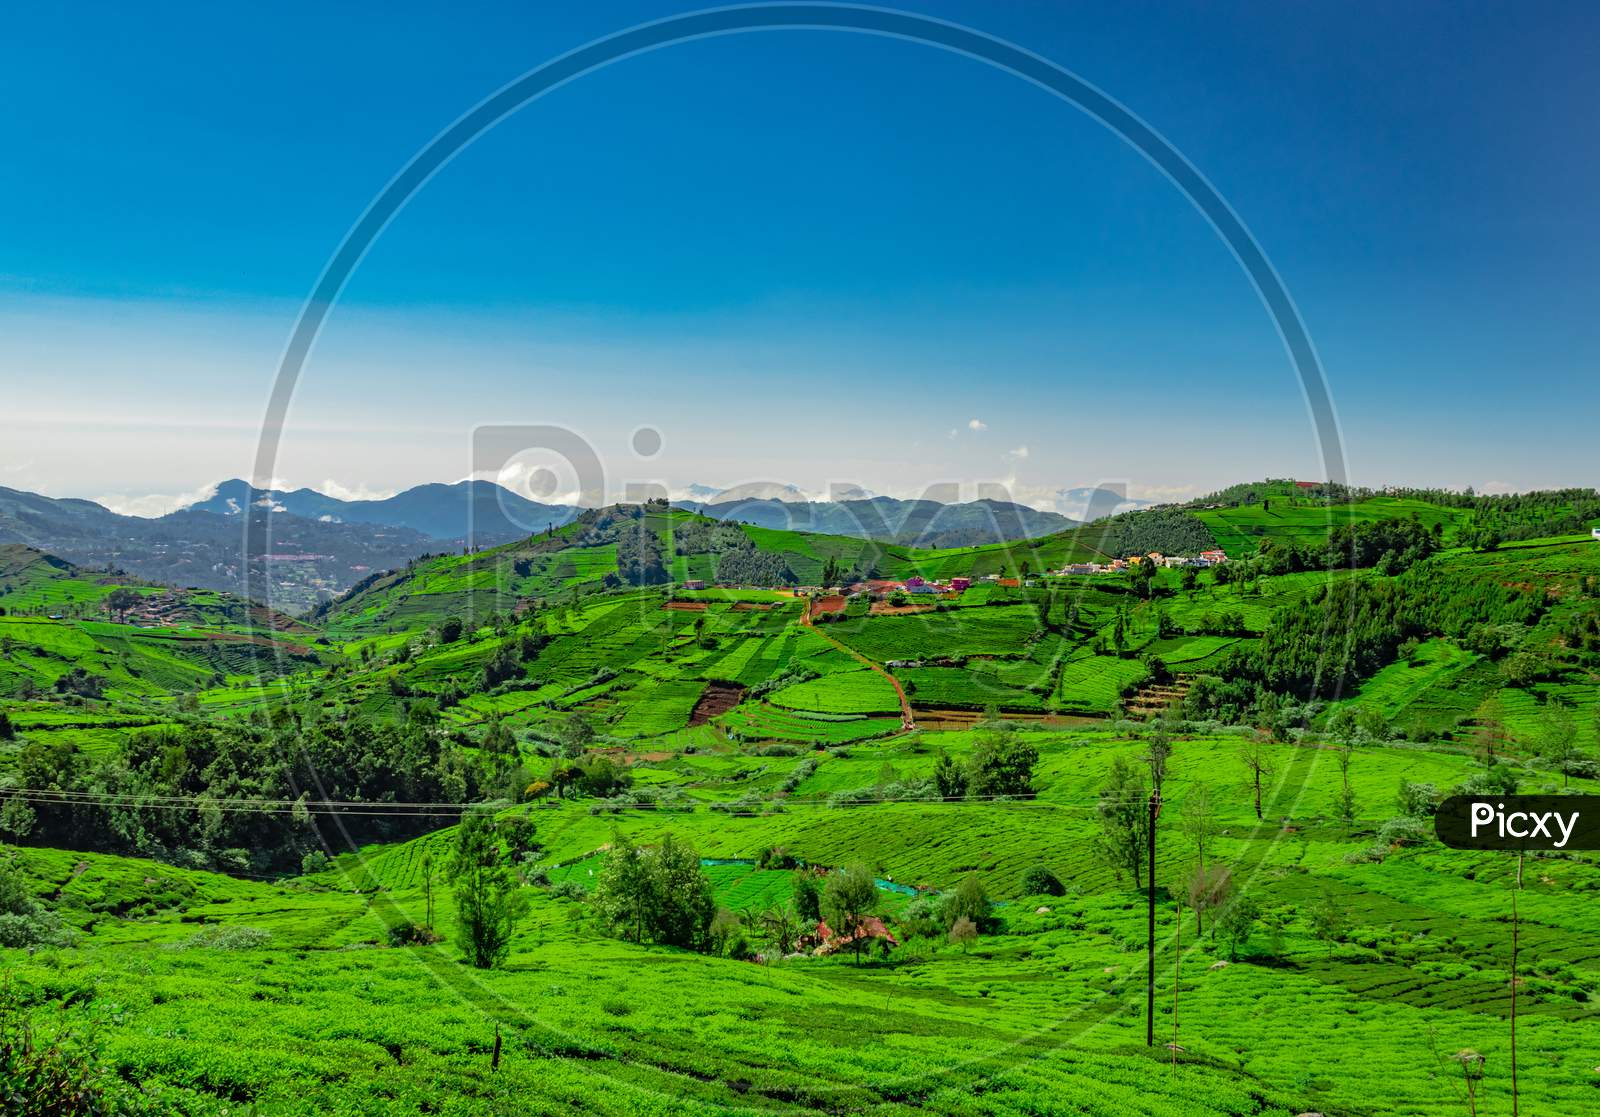 Mountain Range Covered With Green Tea Garden And Amazing Blue Sky Flat Angle Shot